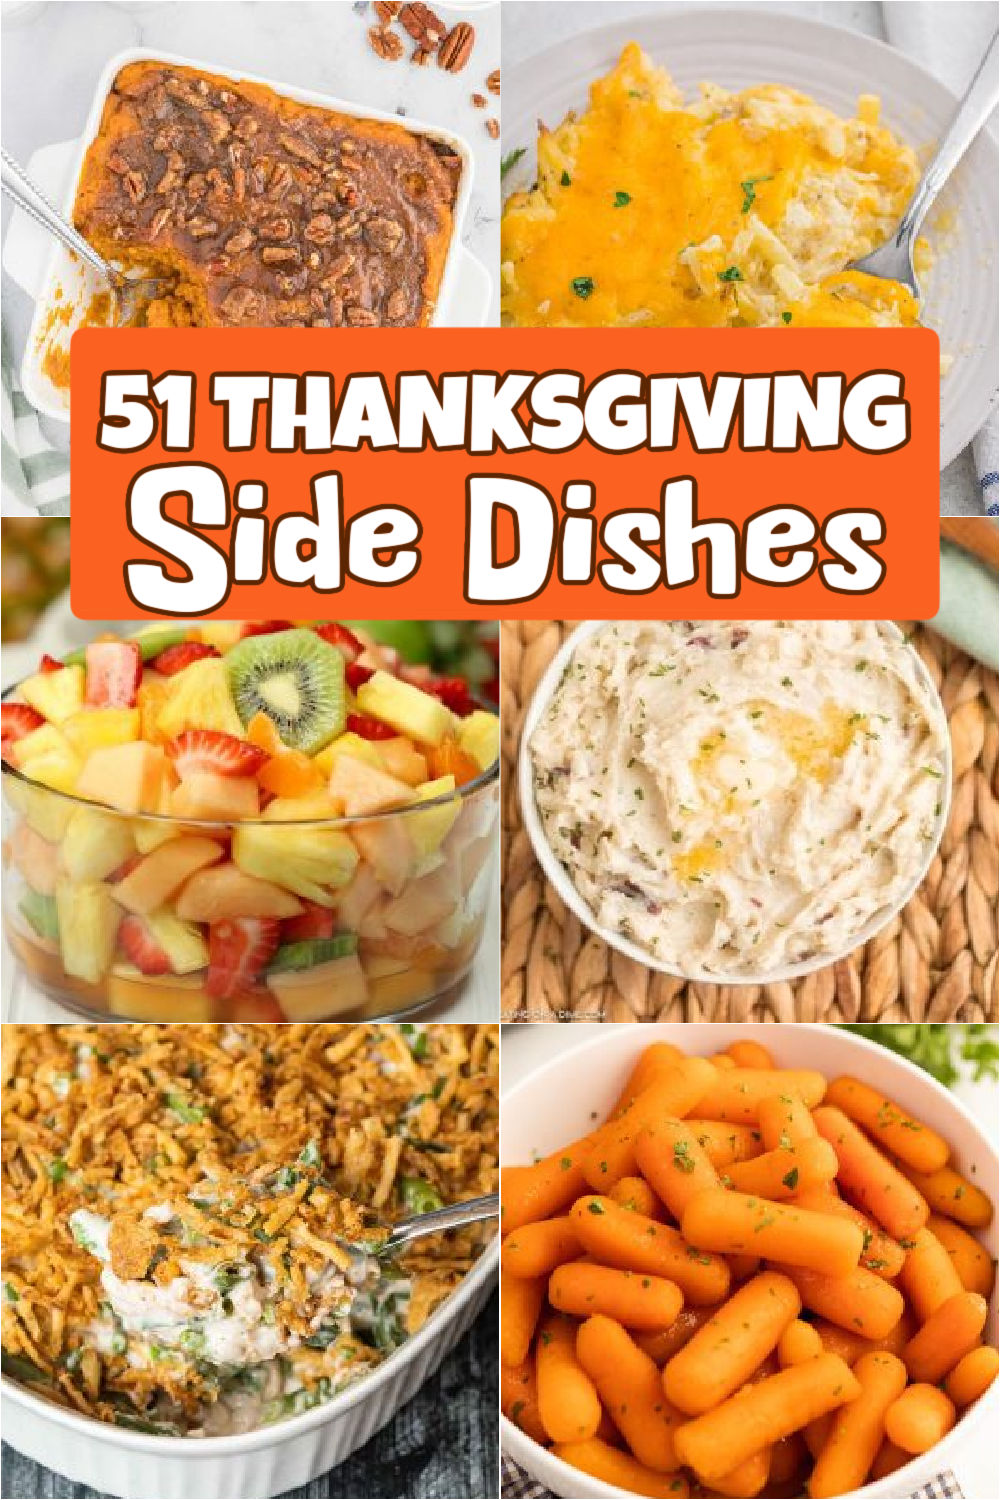 
Pair your meals this Thanksgiving with the best Thanksgiving side dishes. 51 easy side dish ideas for Thanksgiving that your whole family will enjoy! These are the best recipes including easy make ahead ideas, recipes for a crowd, crockpot recipes, healthy options, cold sides and Southern classics. #eatingonadime #easythanksgivingsidedishes #thanksgiving